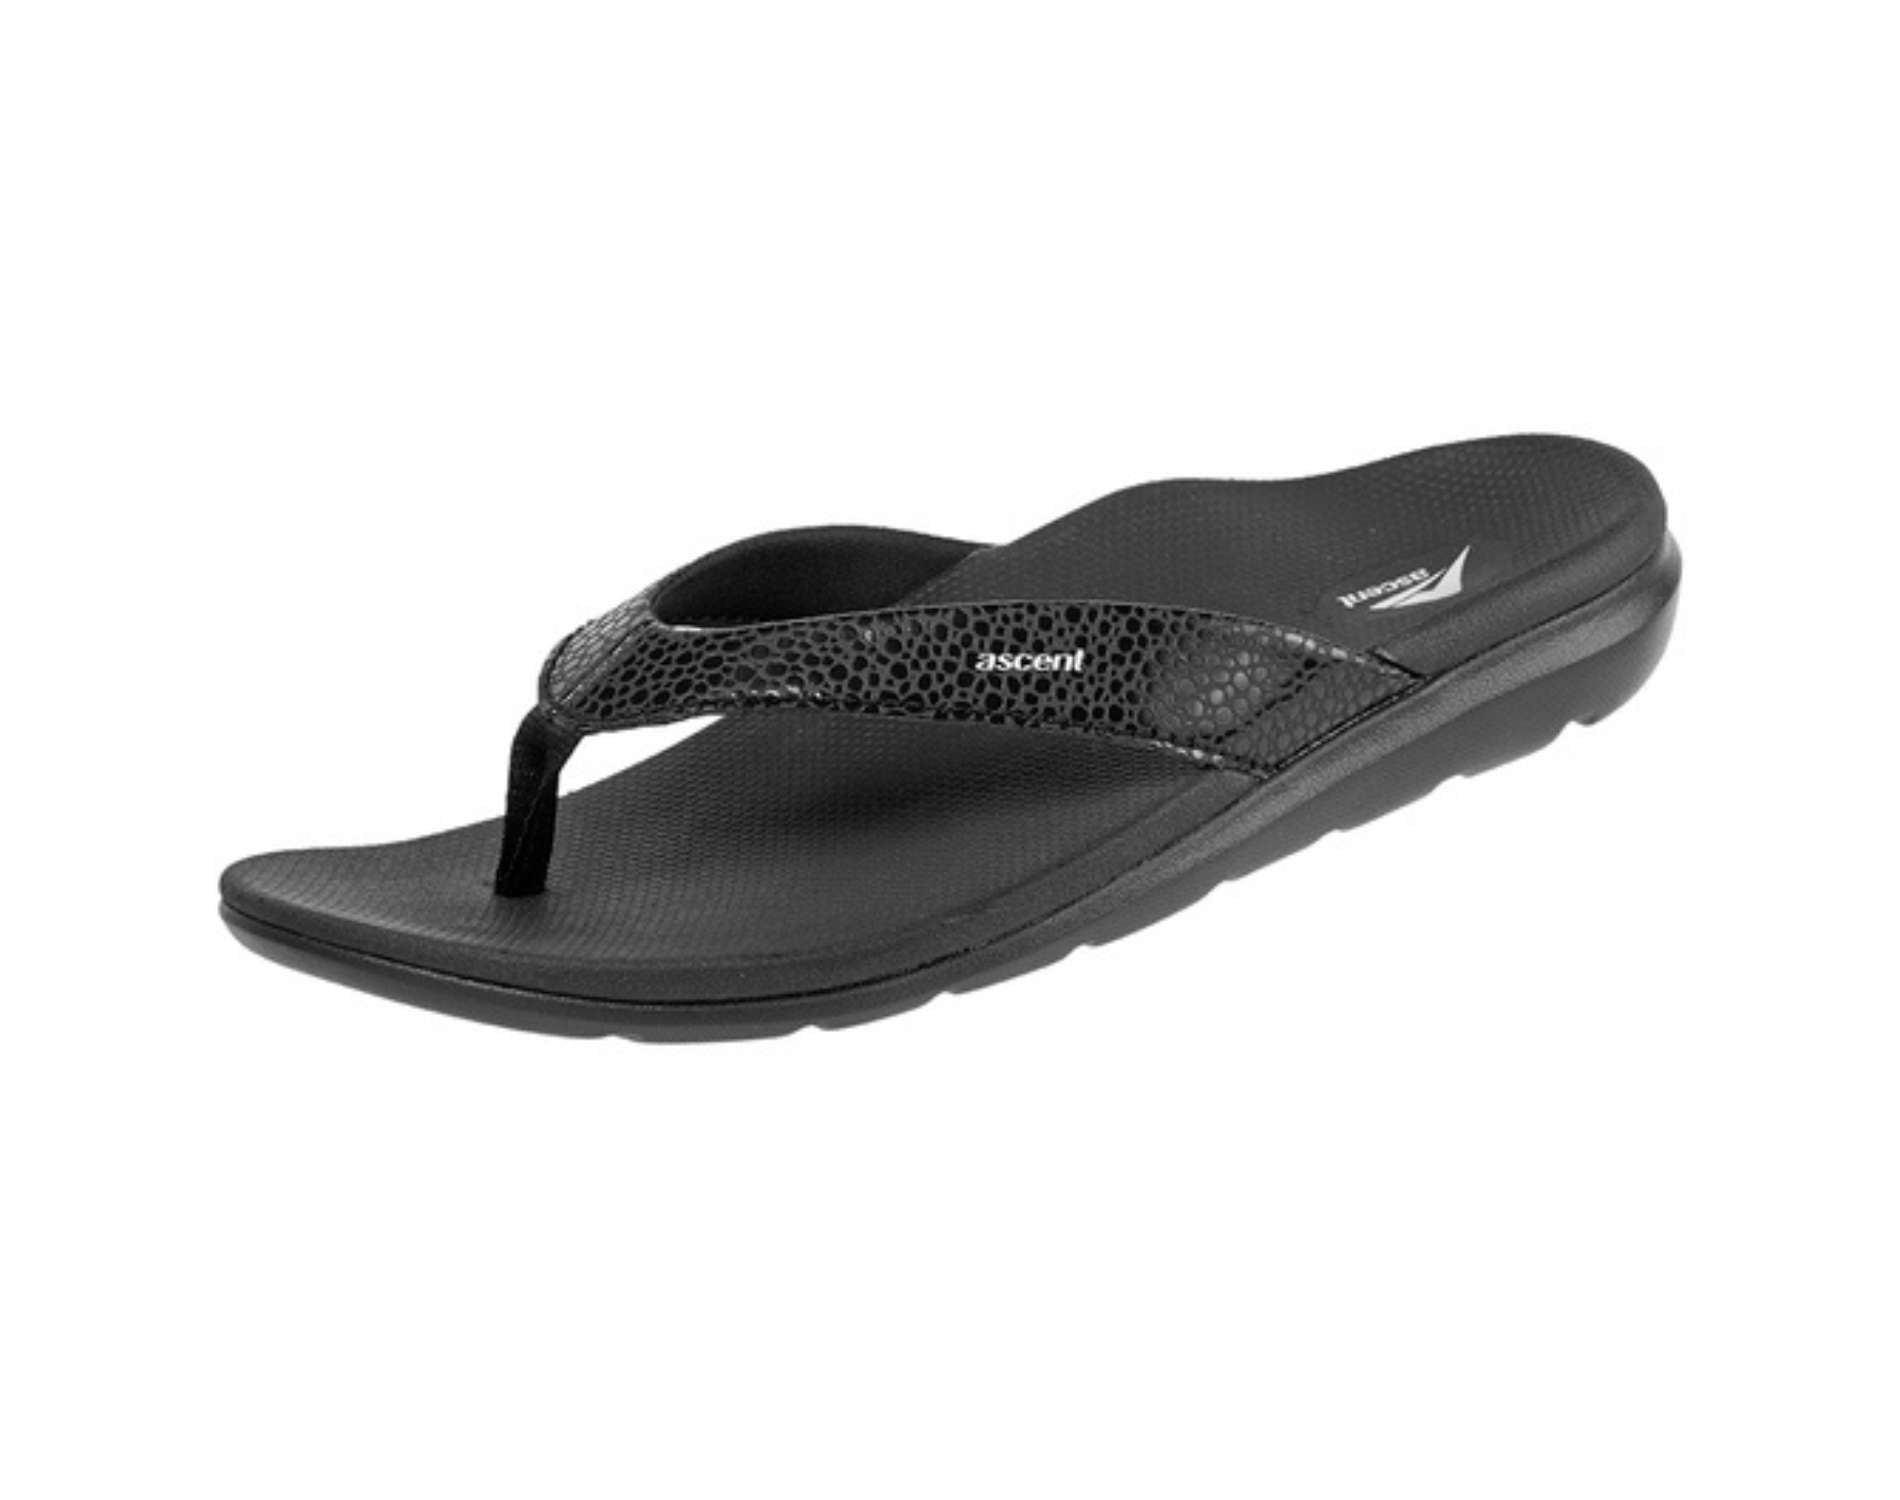 Ascent's Groove sandals for women in black colour